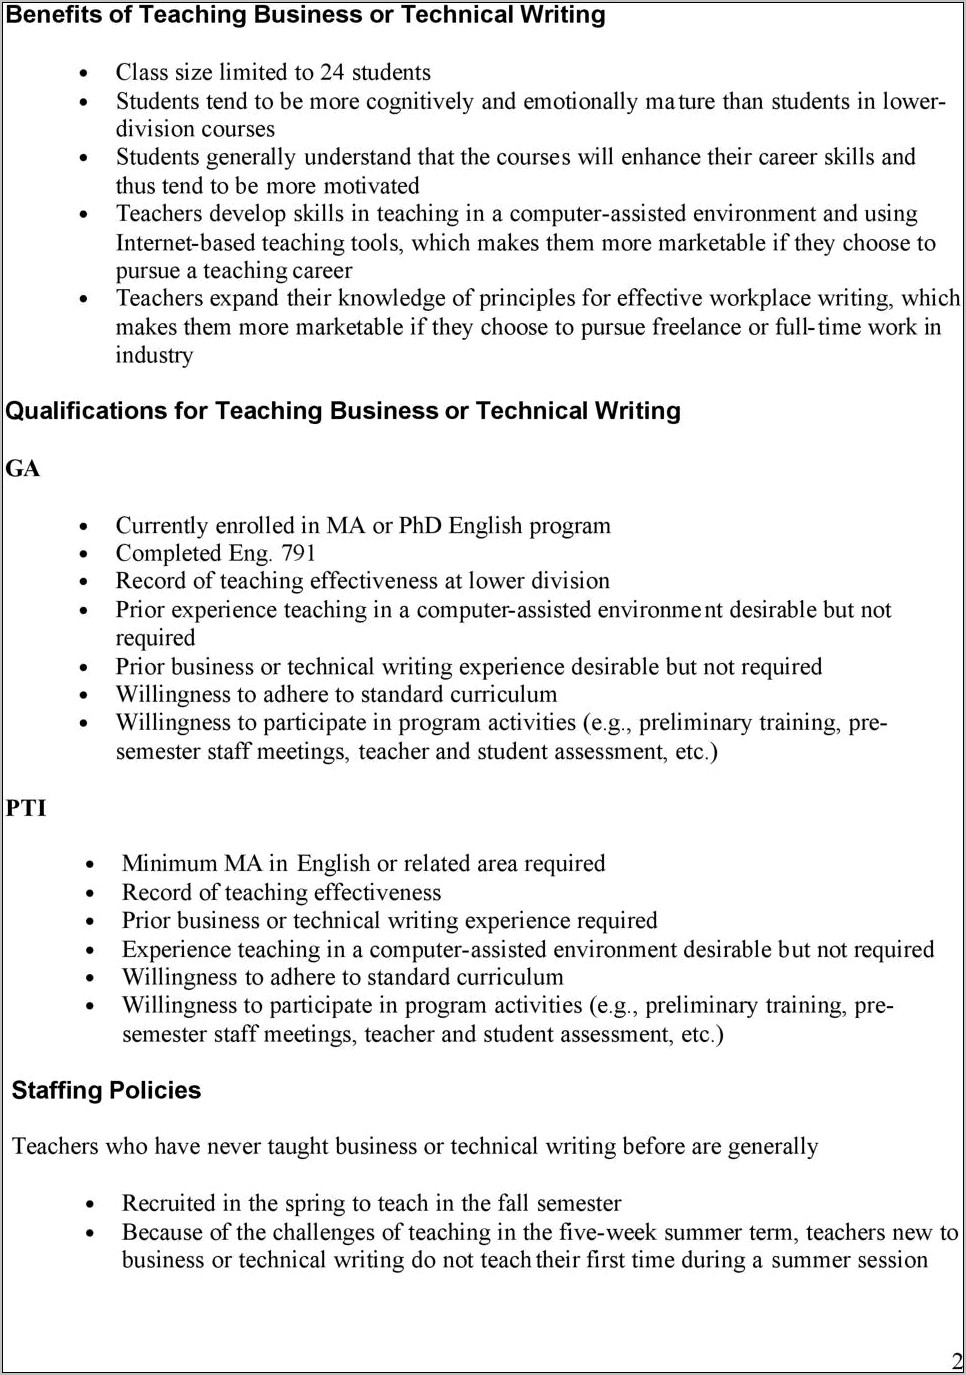 Eng 407a Business And Technical Writing Resume Template